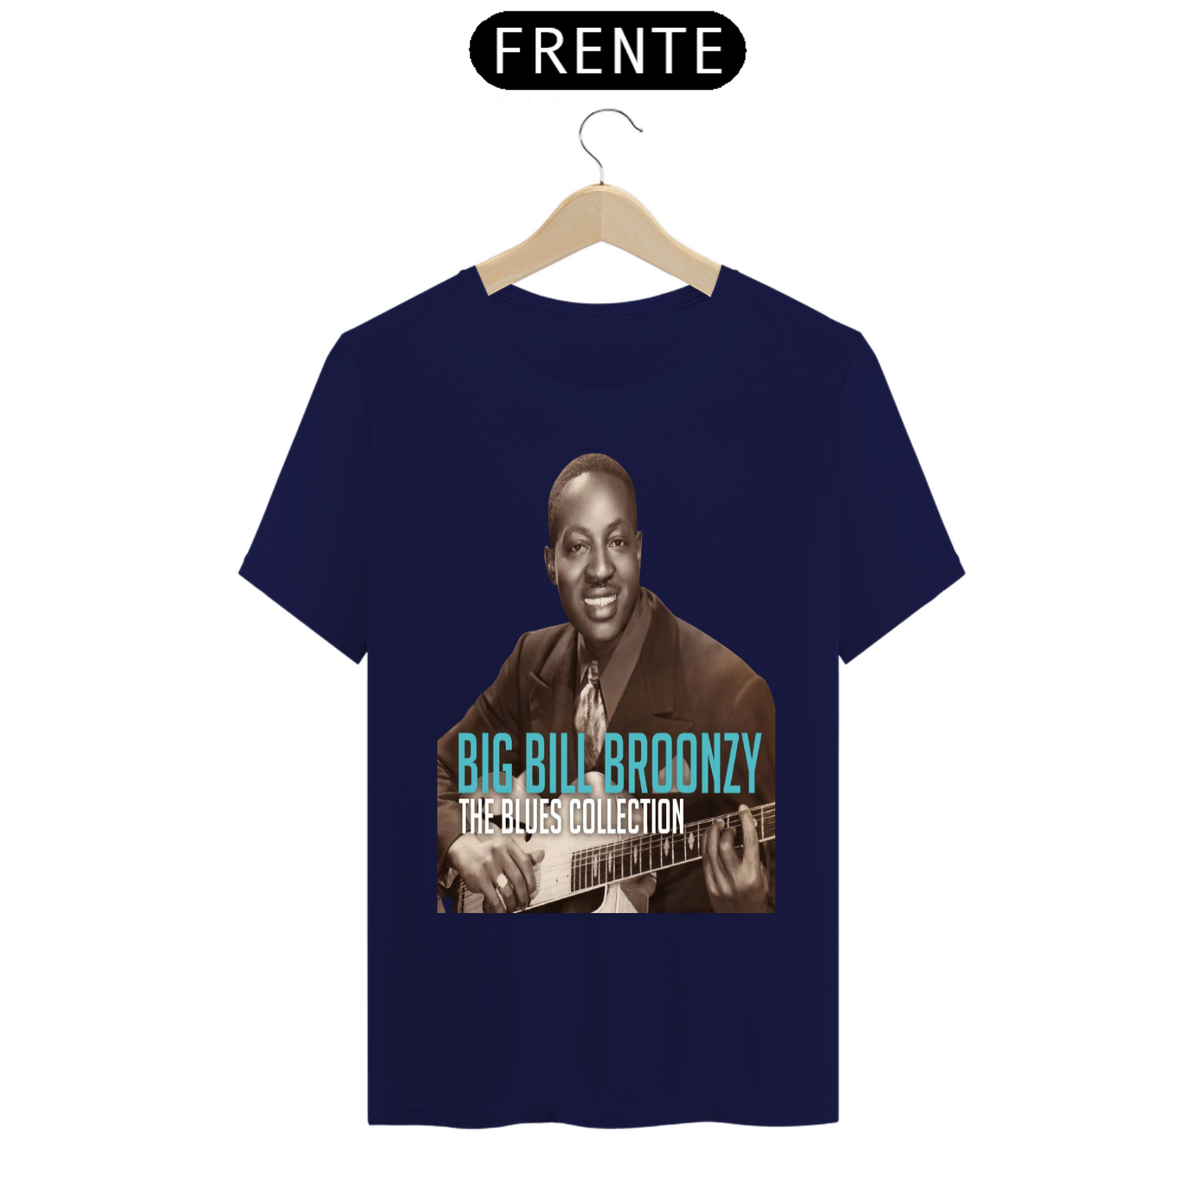 Nome do produto: Big Bill Broonzy - The Blues Collection